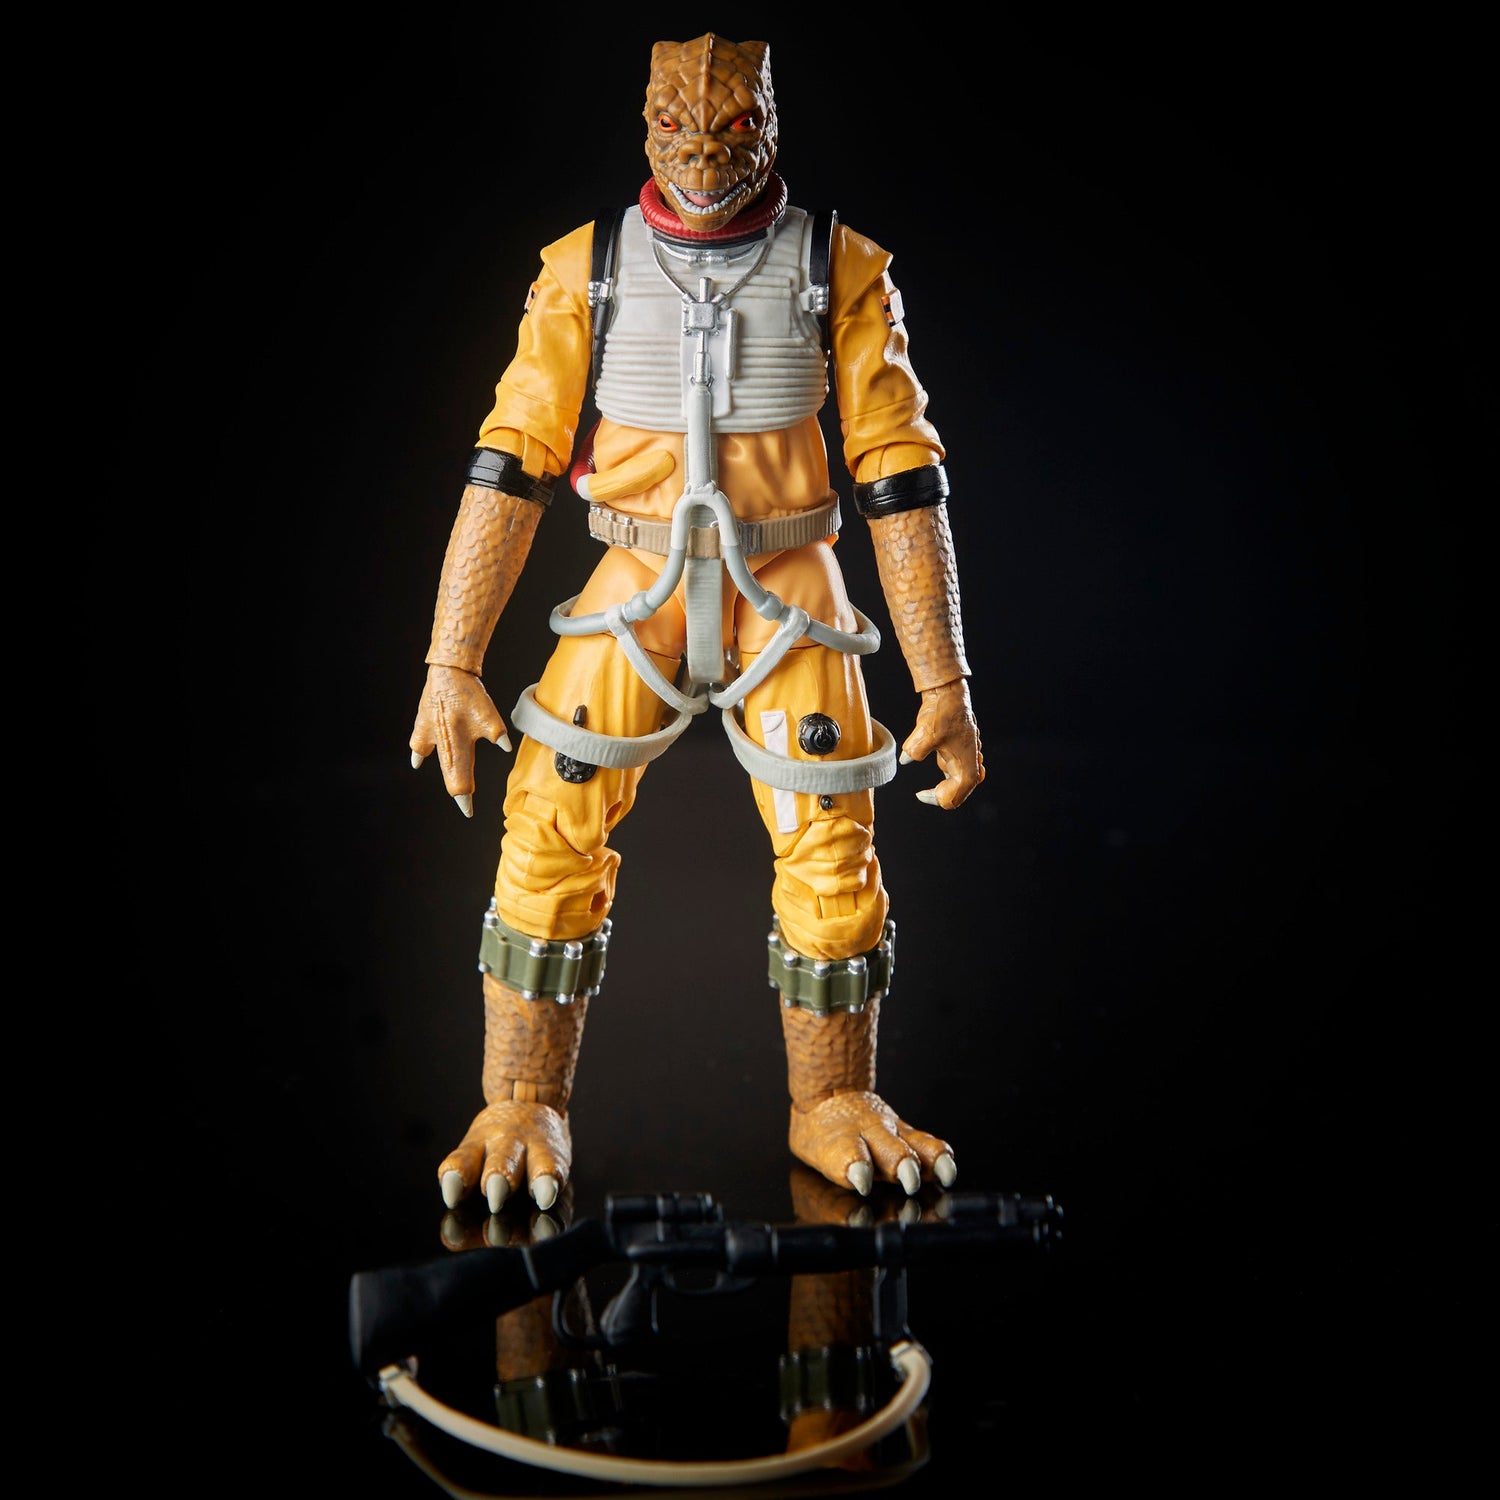 Star Wars The Black Series Archive Bossk